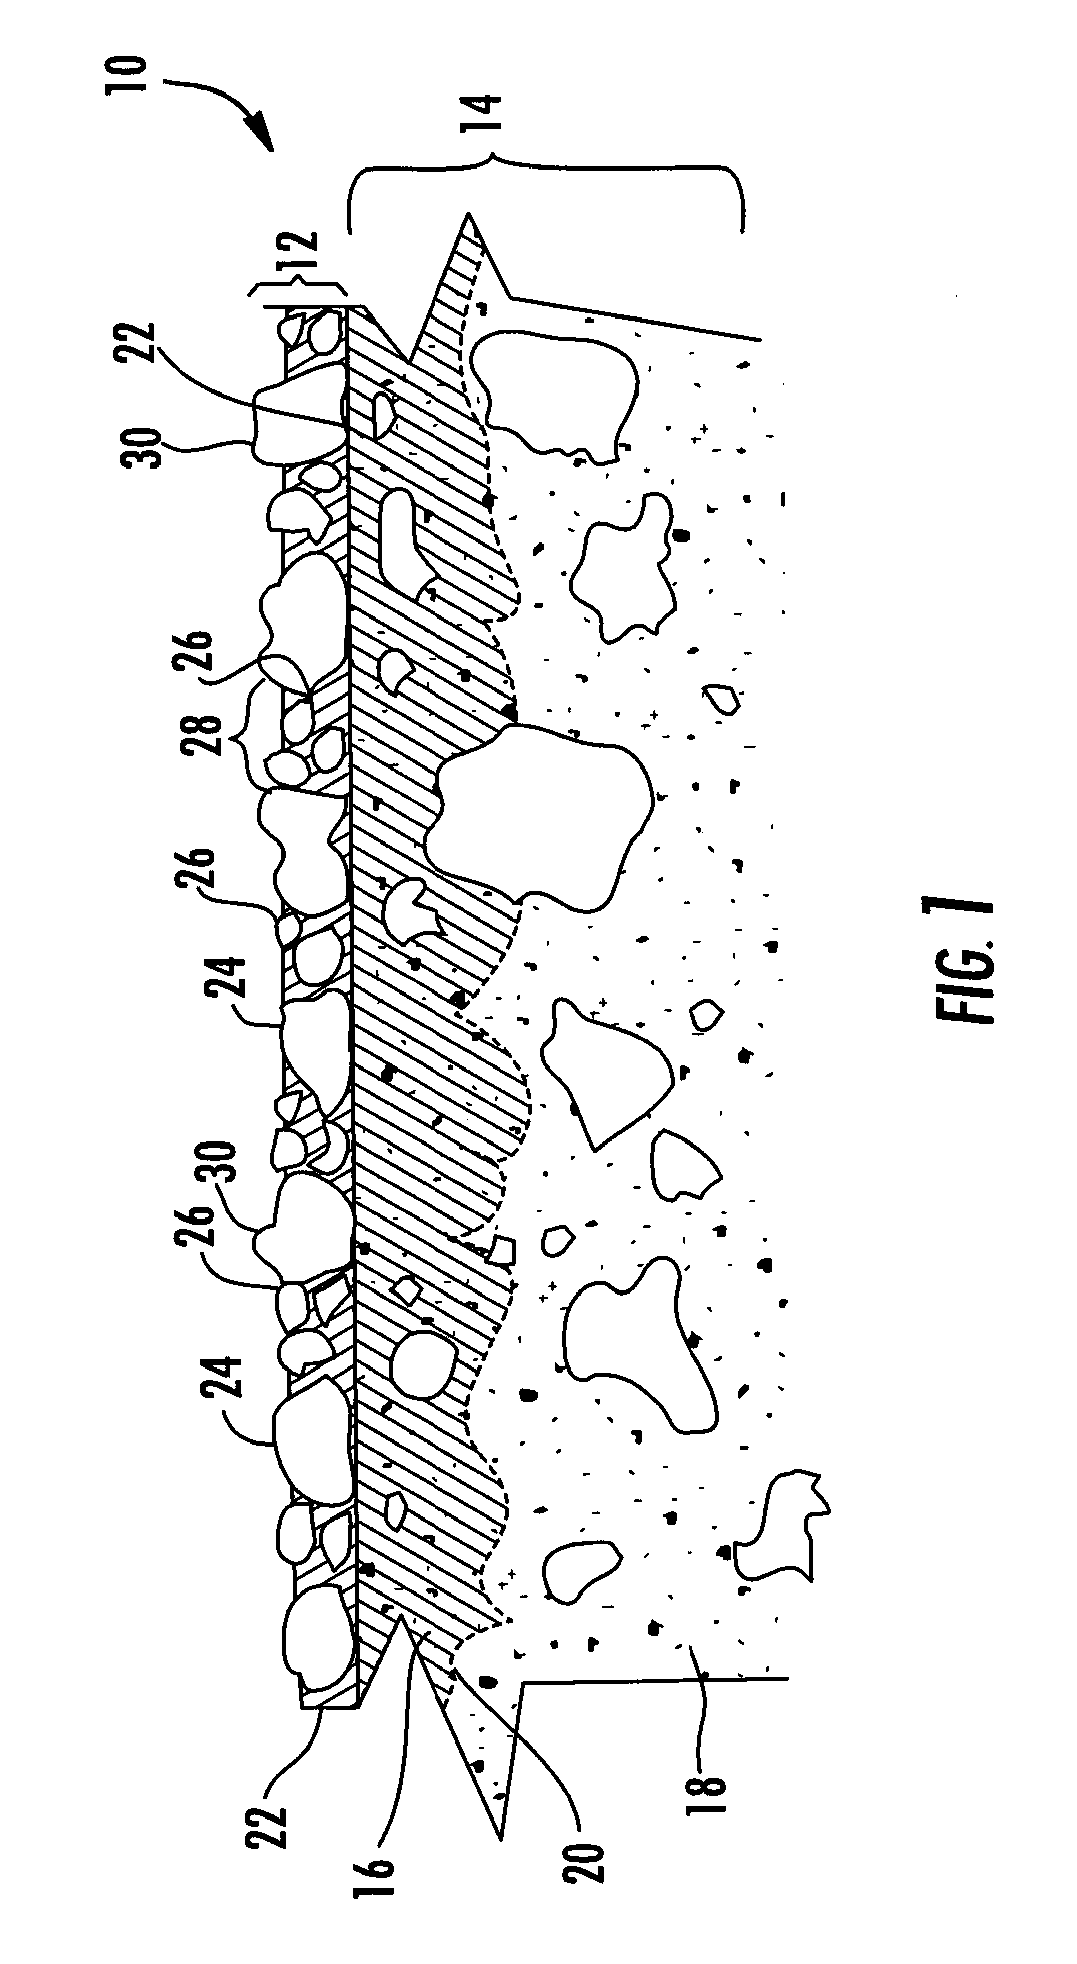 Composition and process of using an asphalt emulsion to convert an unpaved surface into a paved surface